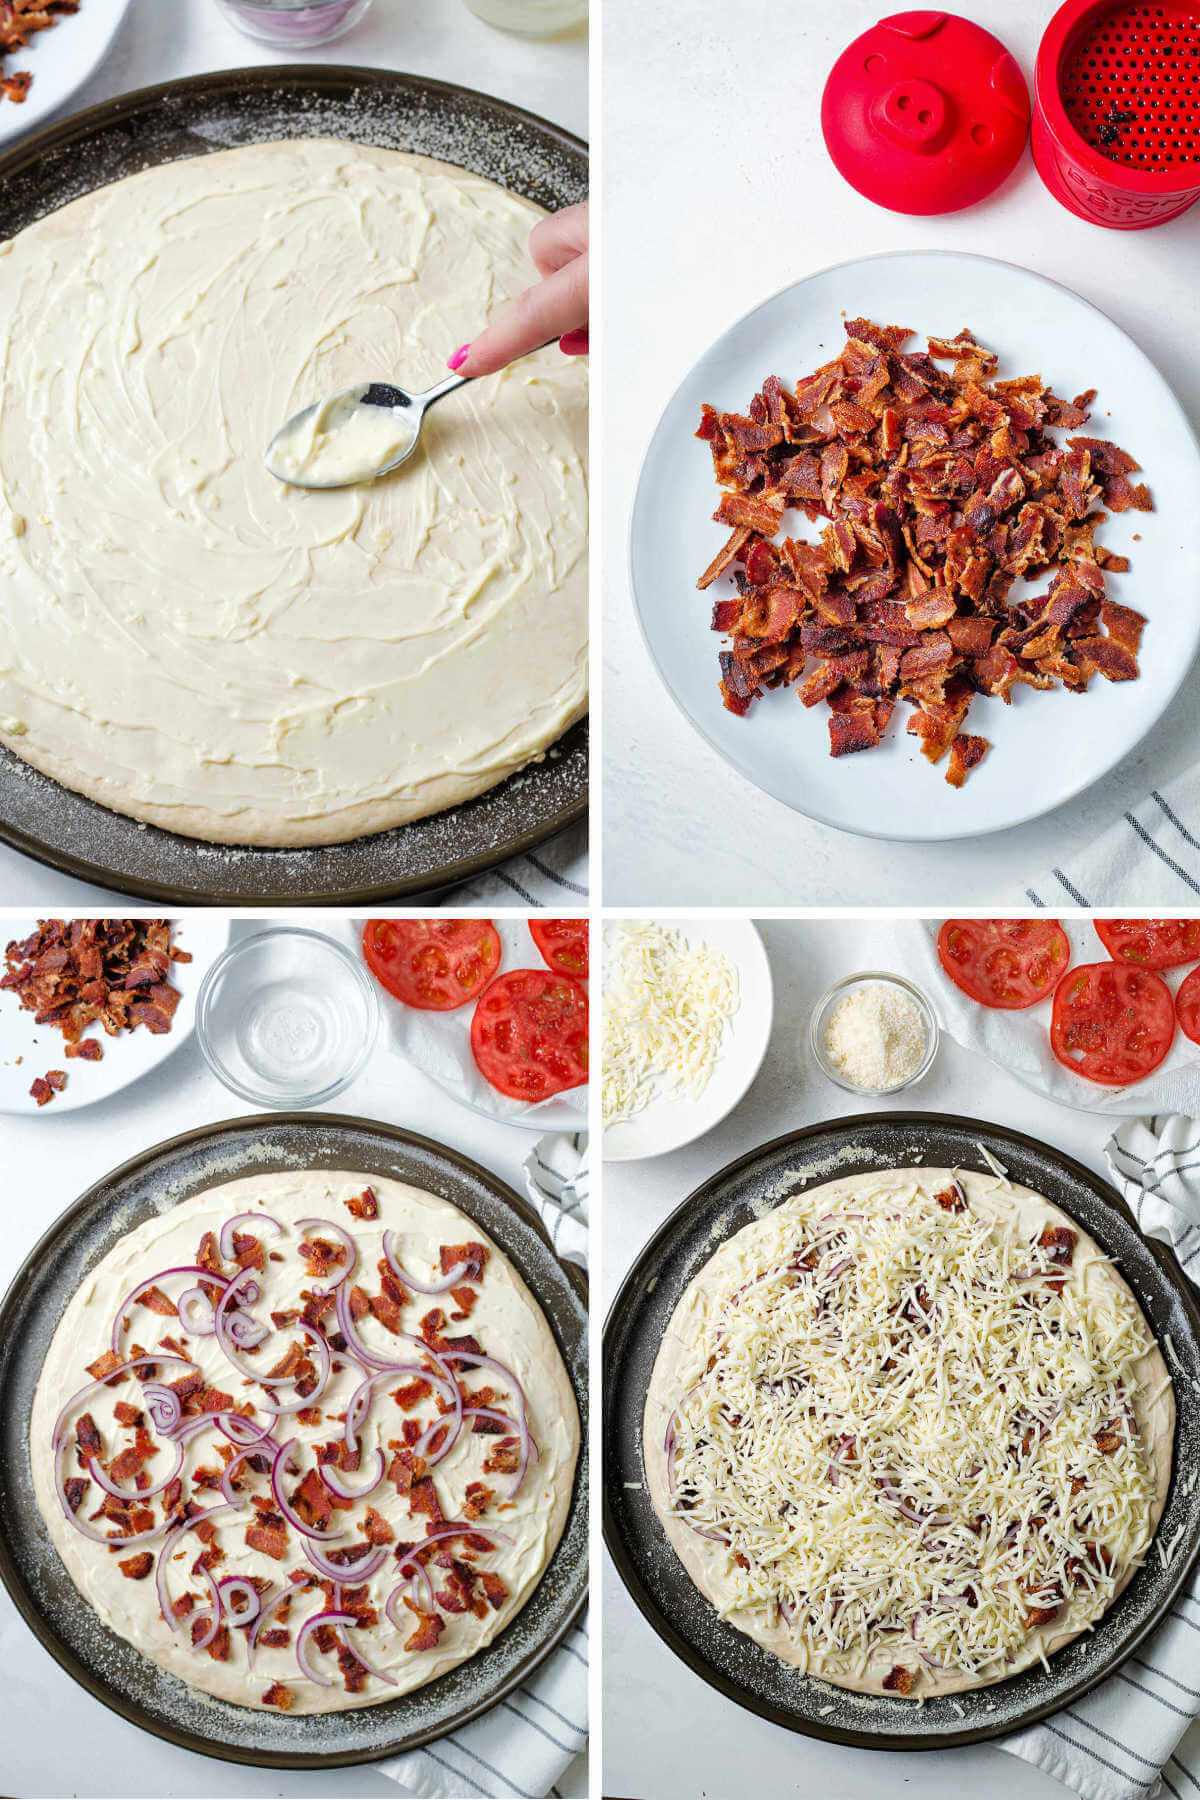 spread garlic mayo on dough; crumble bacon; layer ingredients and cheese on pizza for BLT pizza.